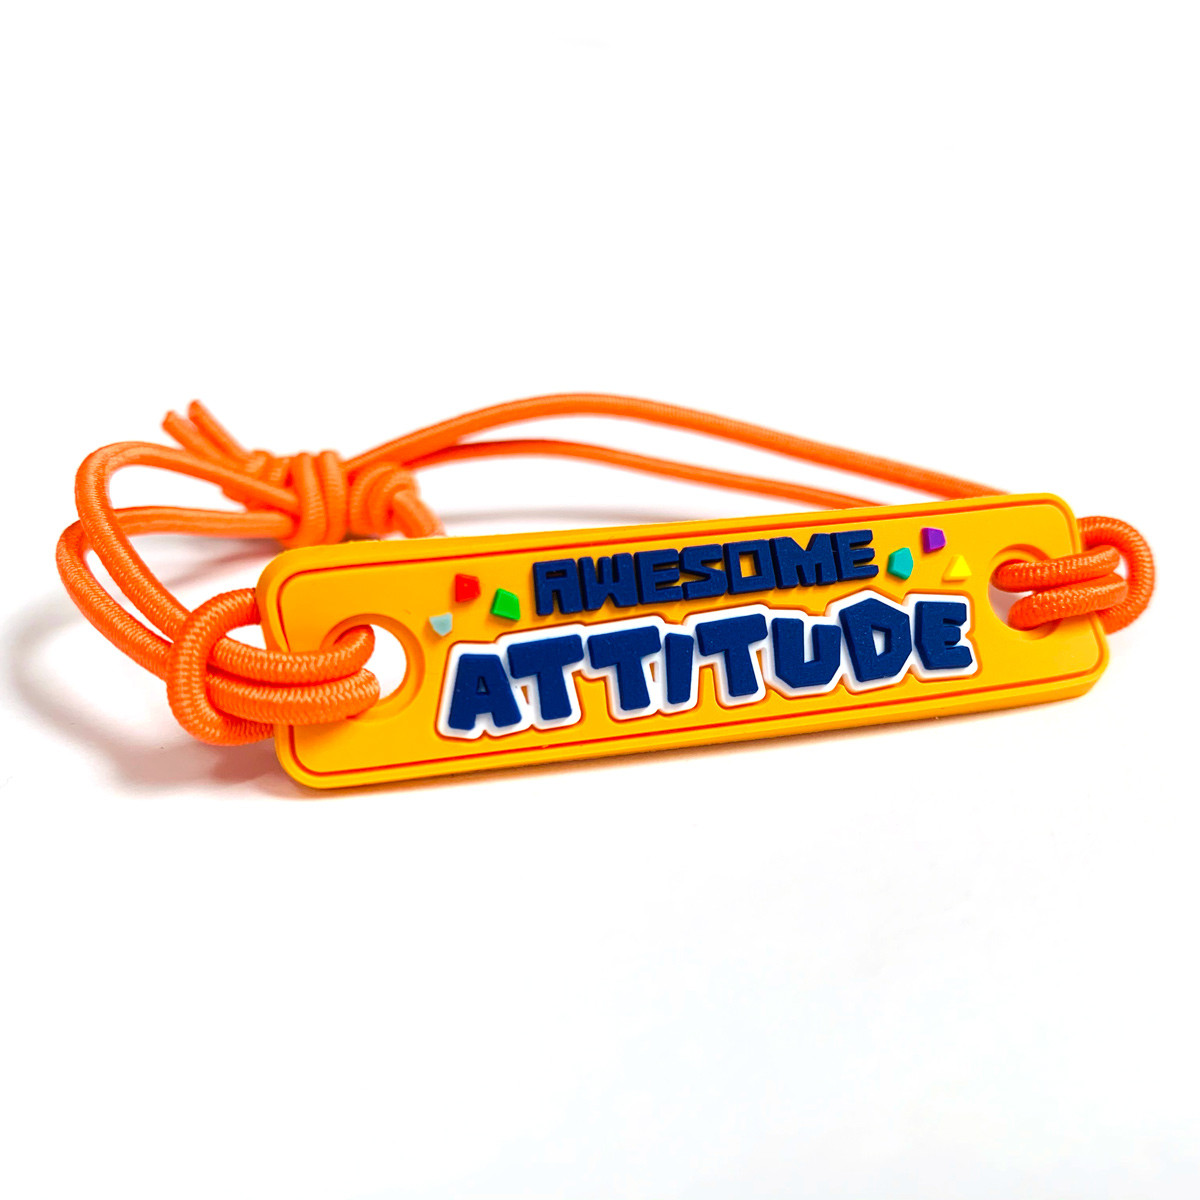 3D Bands - Awesome Attitude